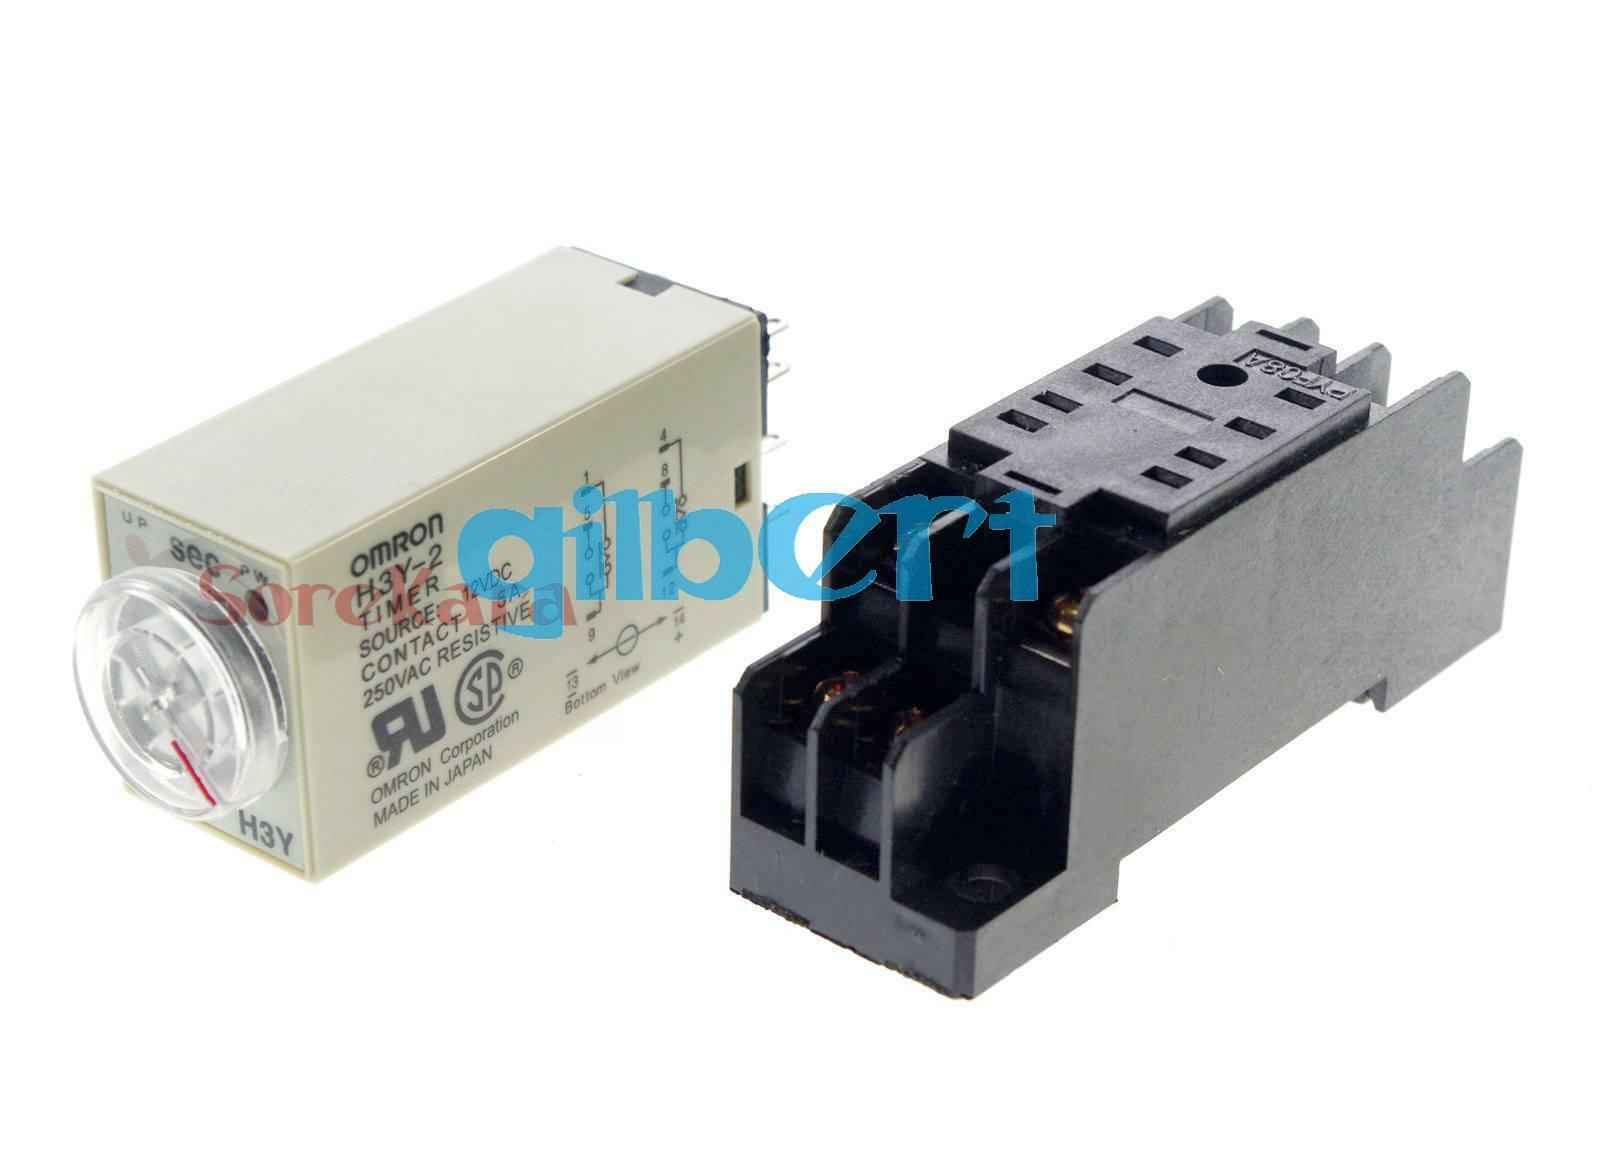 2.0-60S 110V H3Y-2 Power On Time Delay Relay Solid-State Timer DPDT 8Pins&Socket 